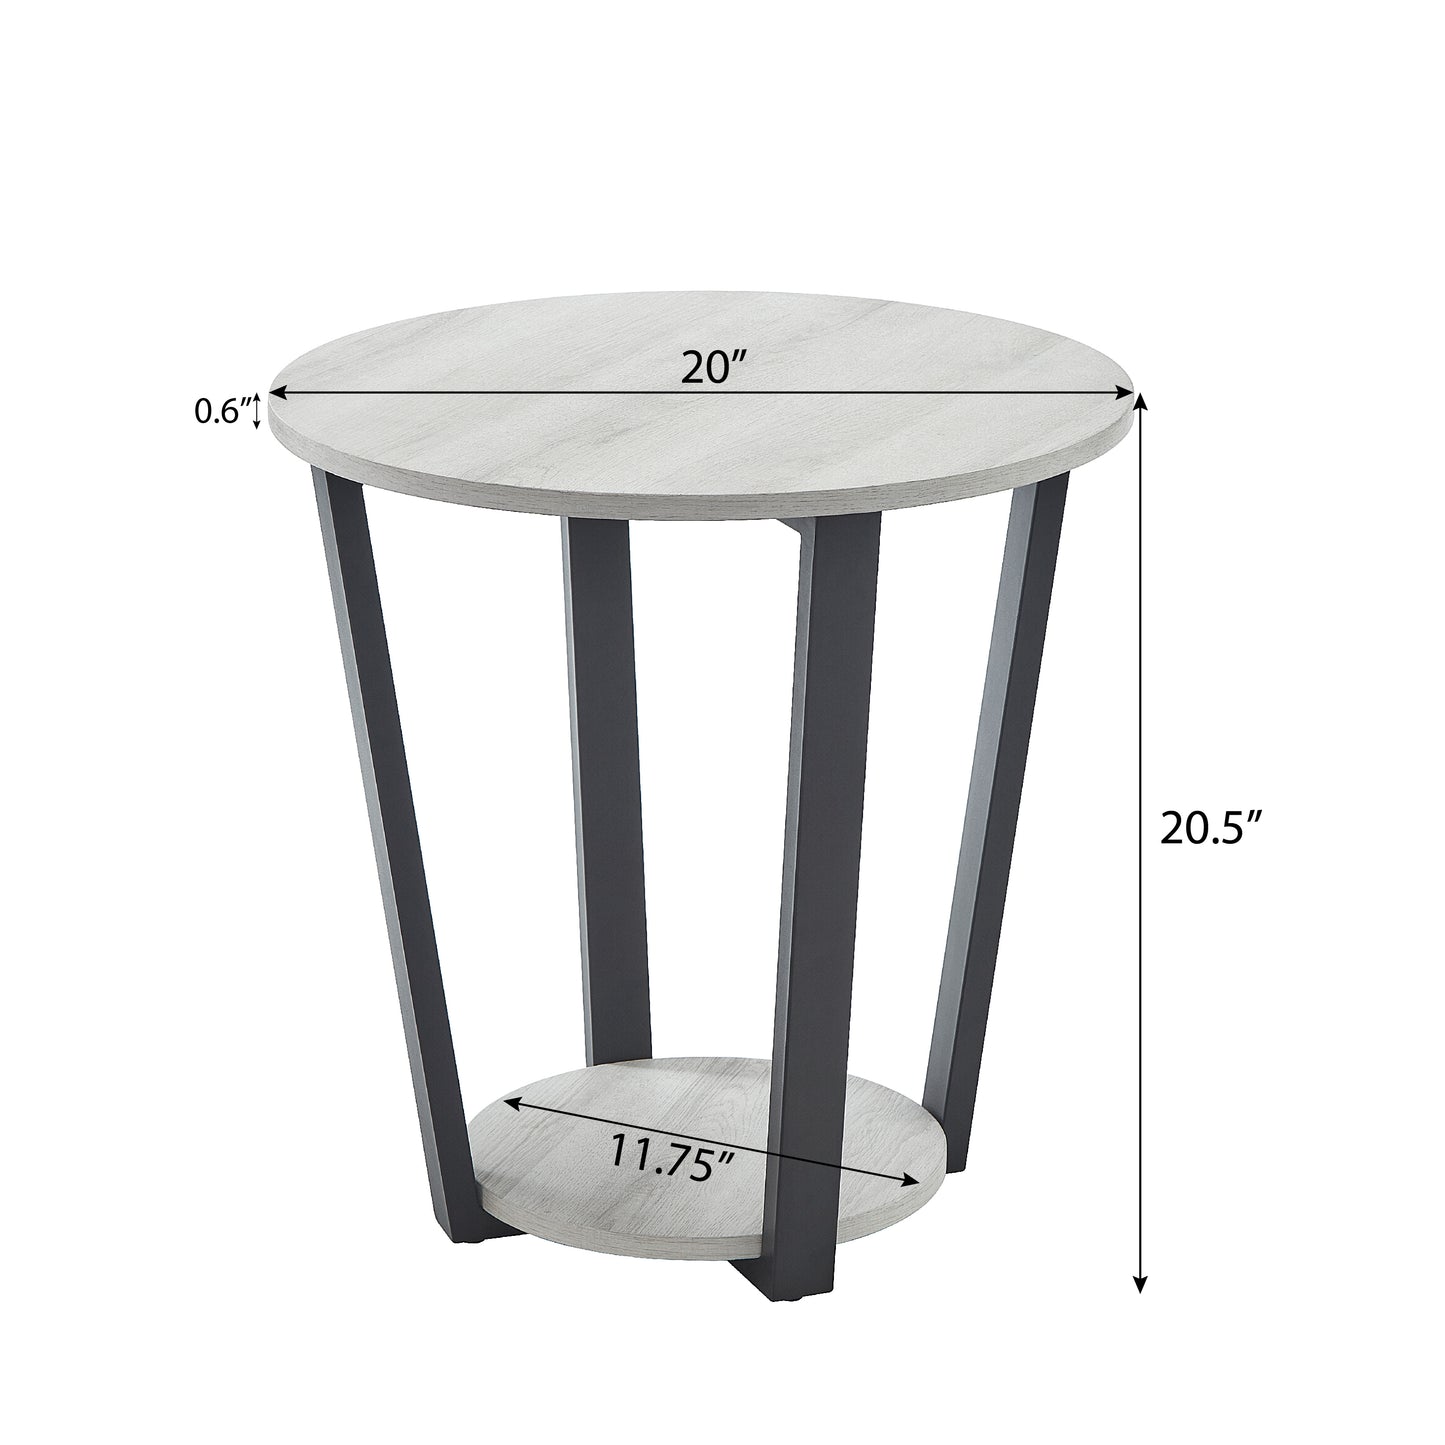 Roundhill Furniture Elysian Contemporary Round End Table with Shelf